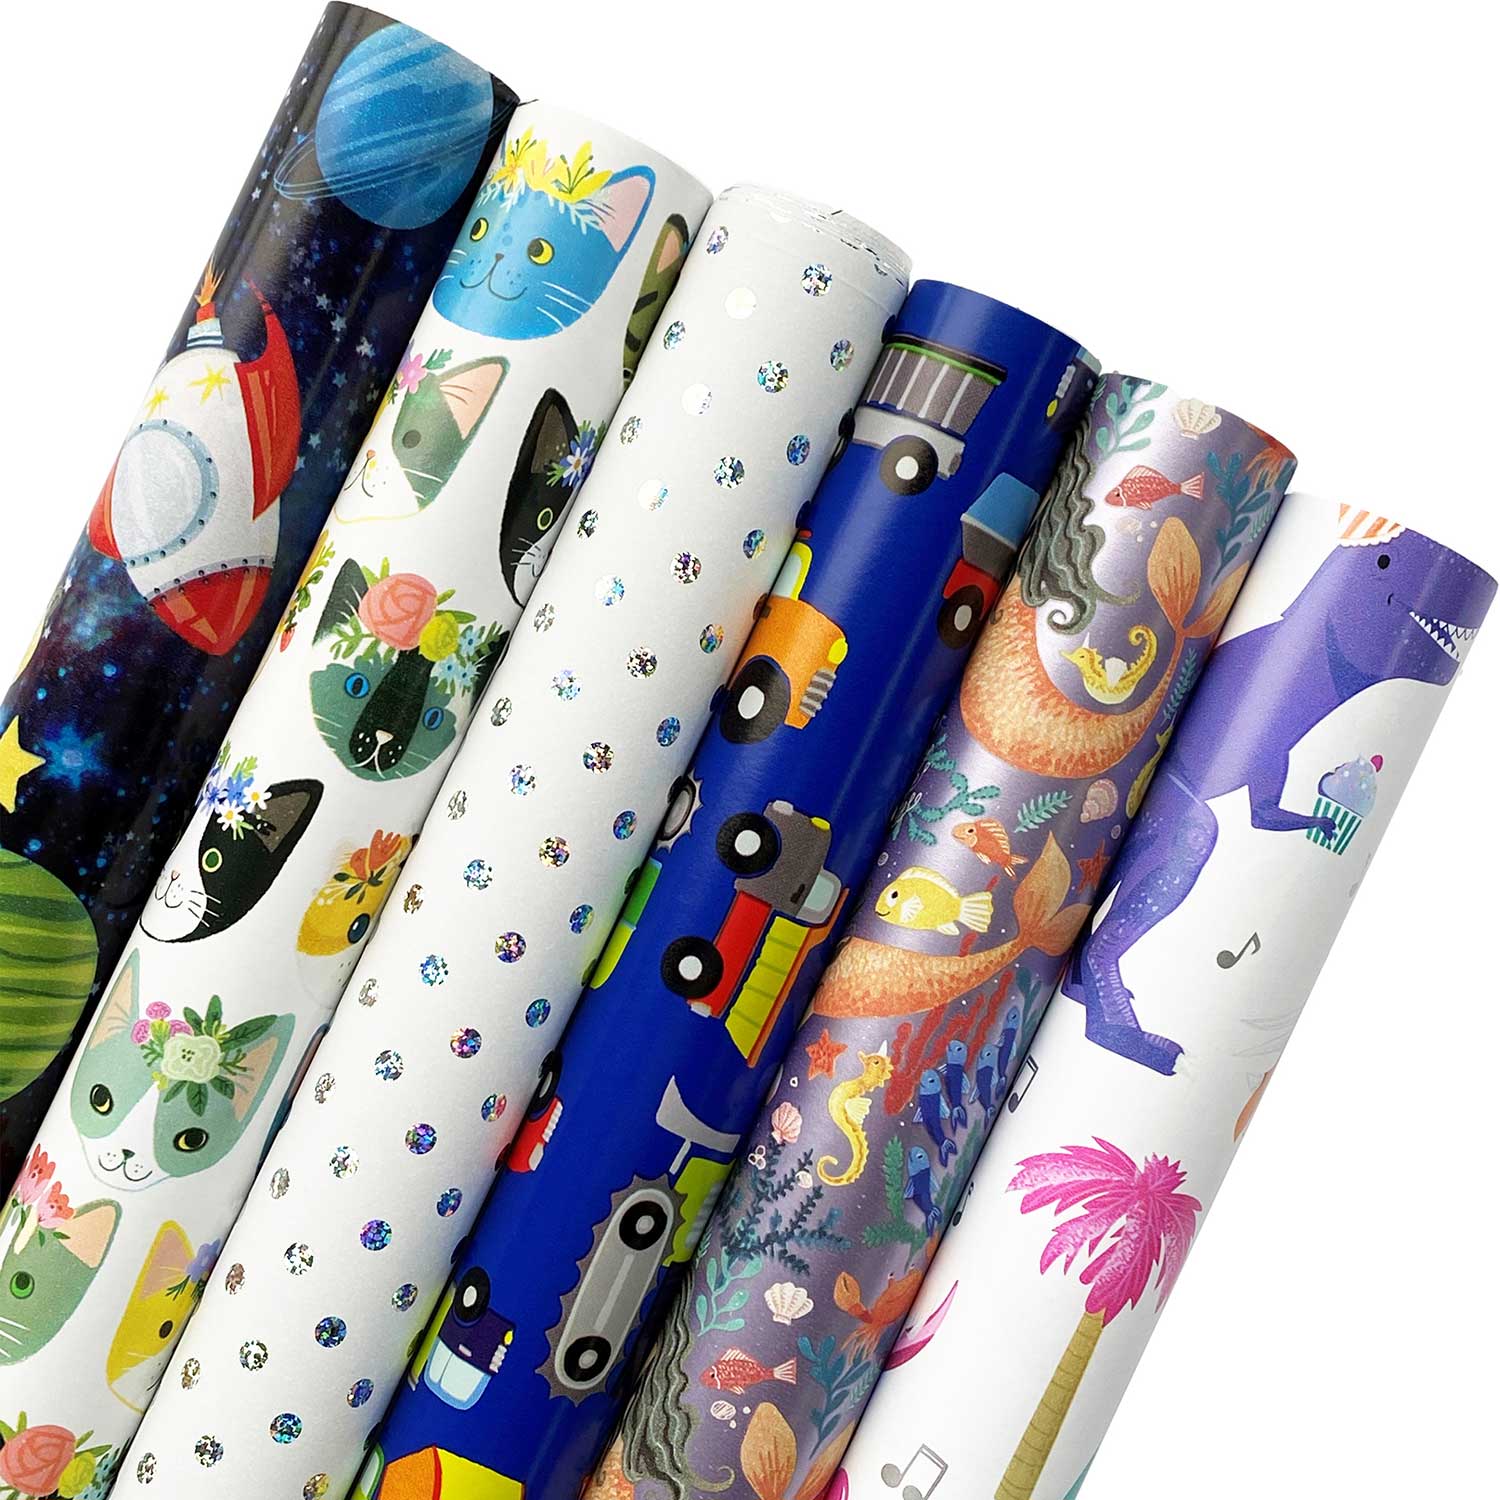 All Occasion Wrapping Paper Variety 6-Pack